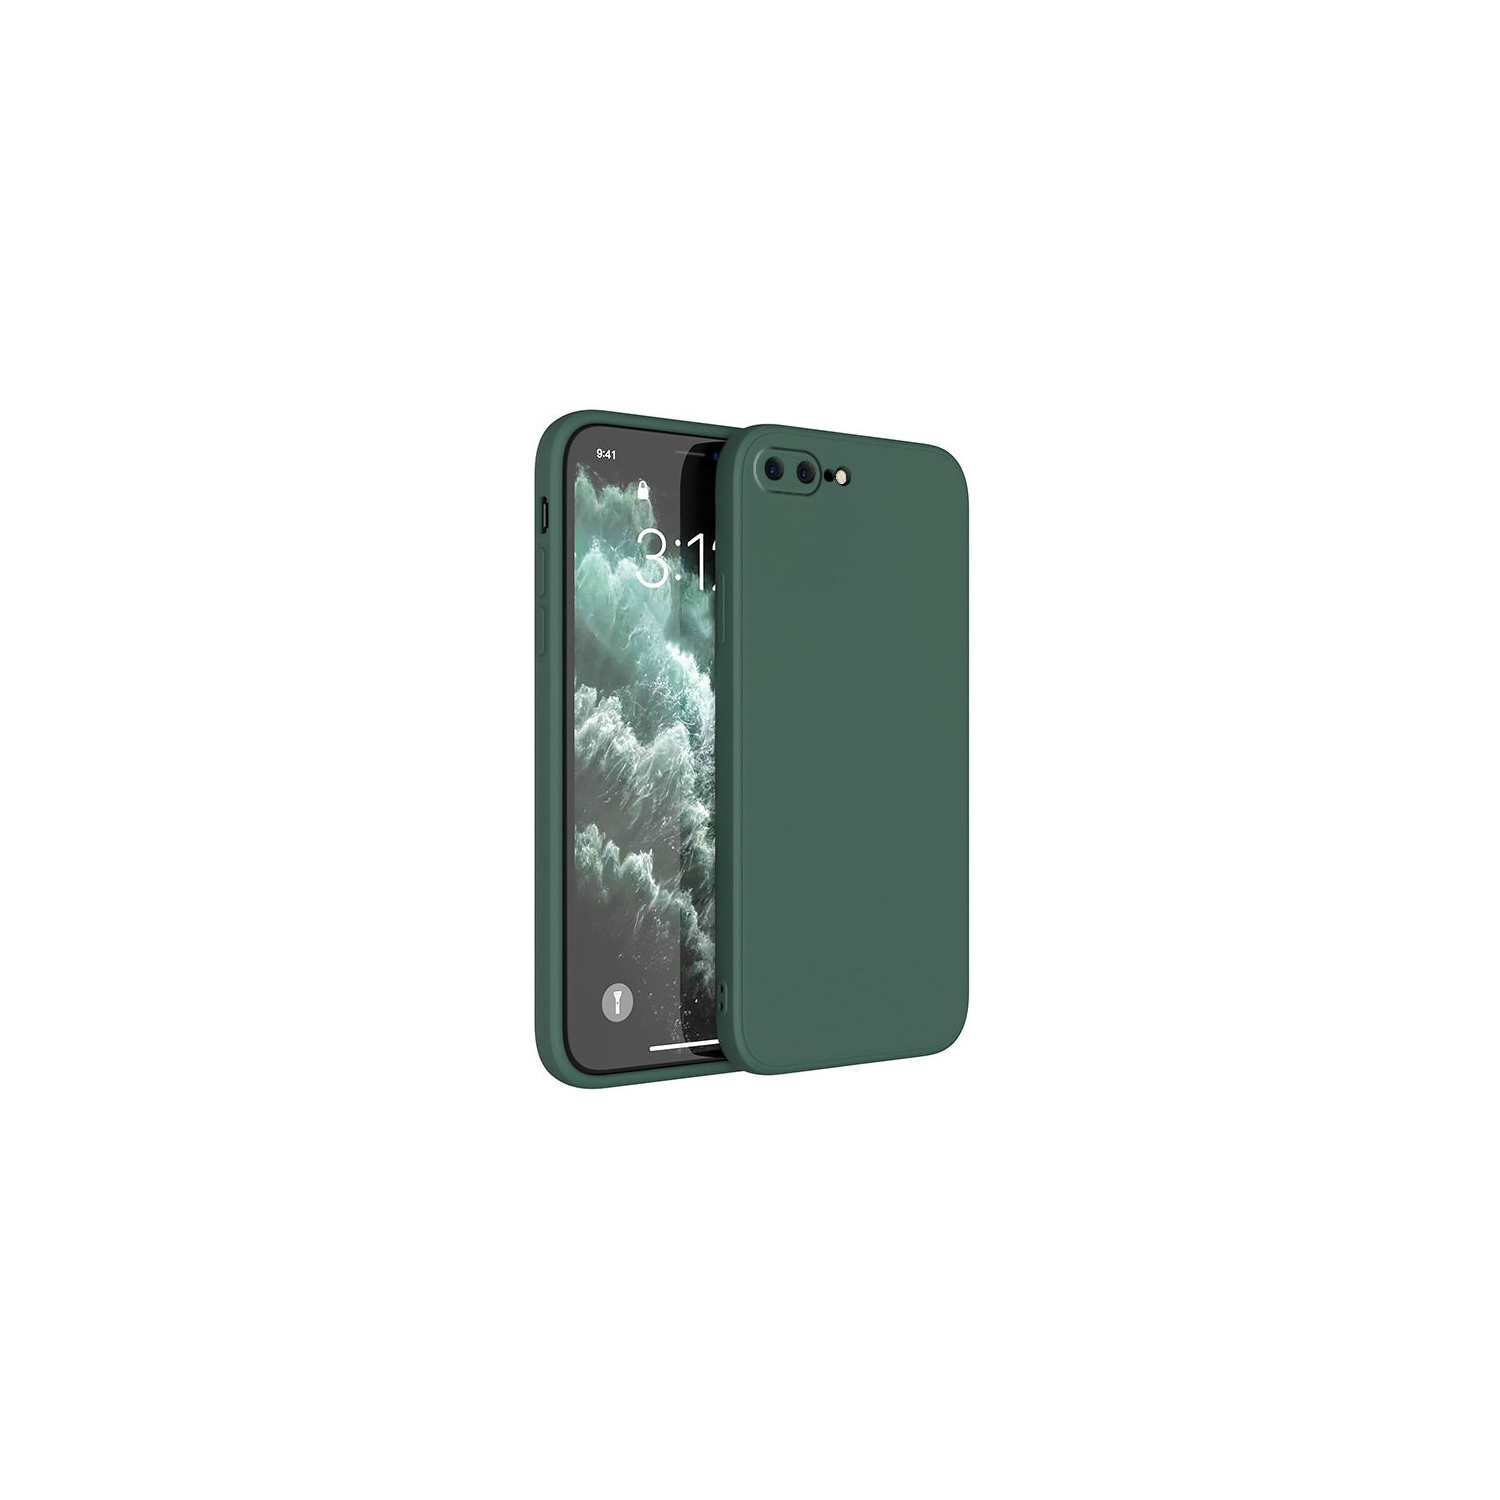 PANDACO Soft Shell Matte Forest Green Case for iPhone 7 Plus or iPhone 8 Plus